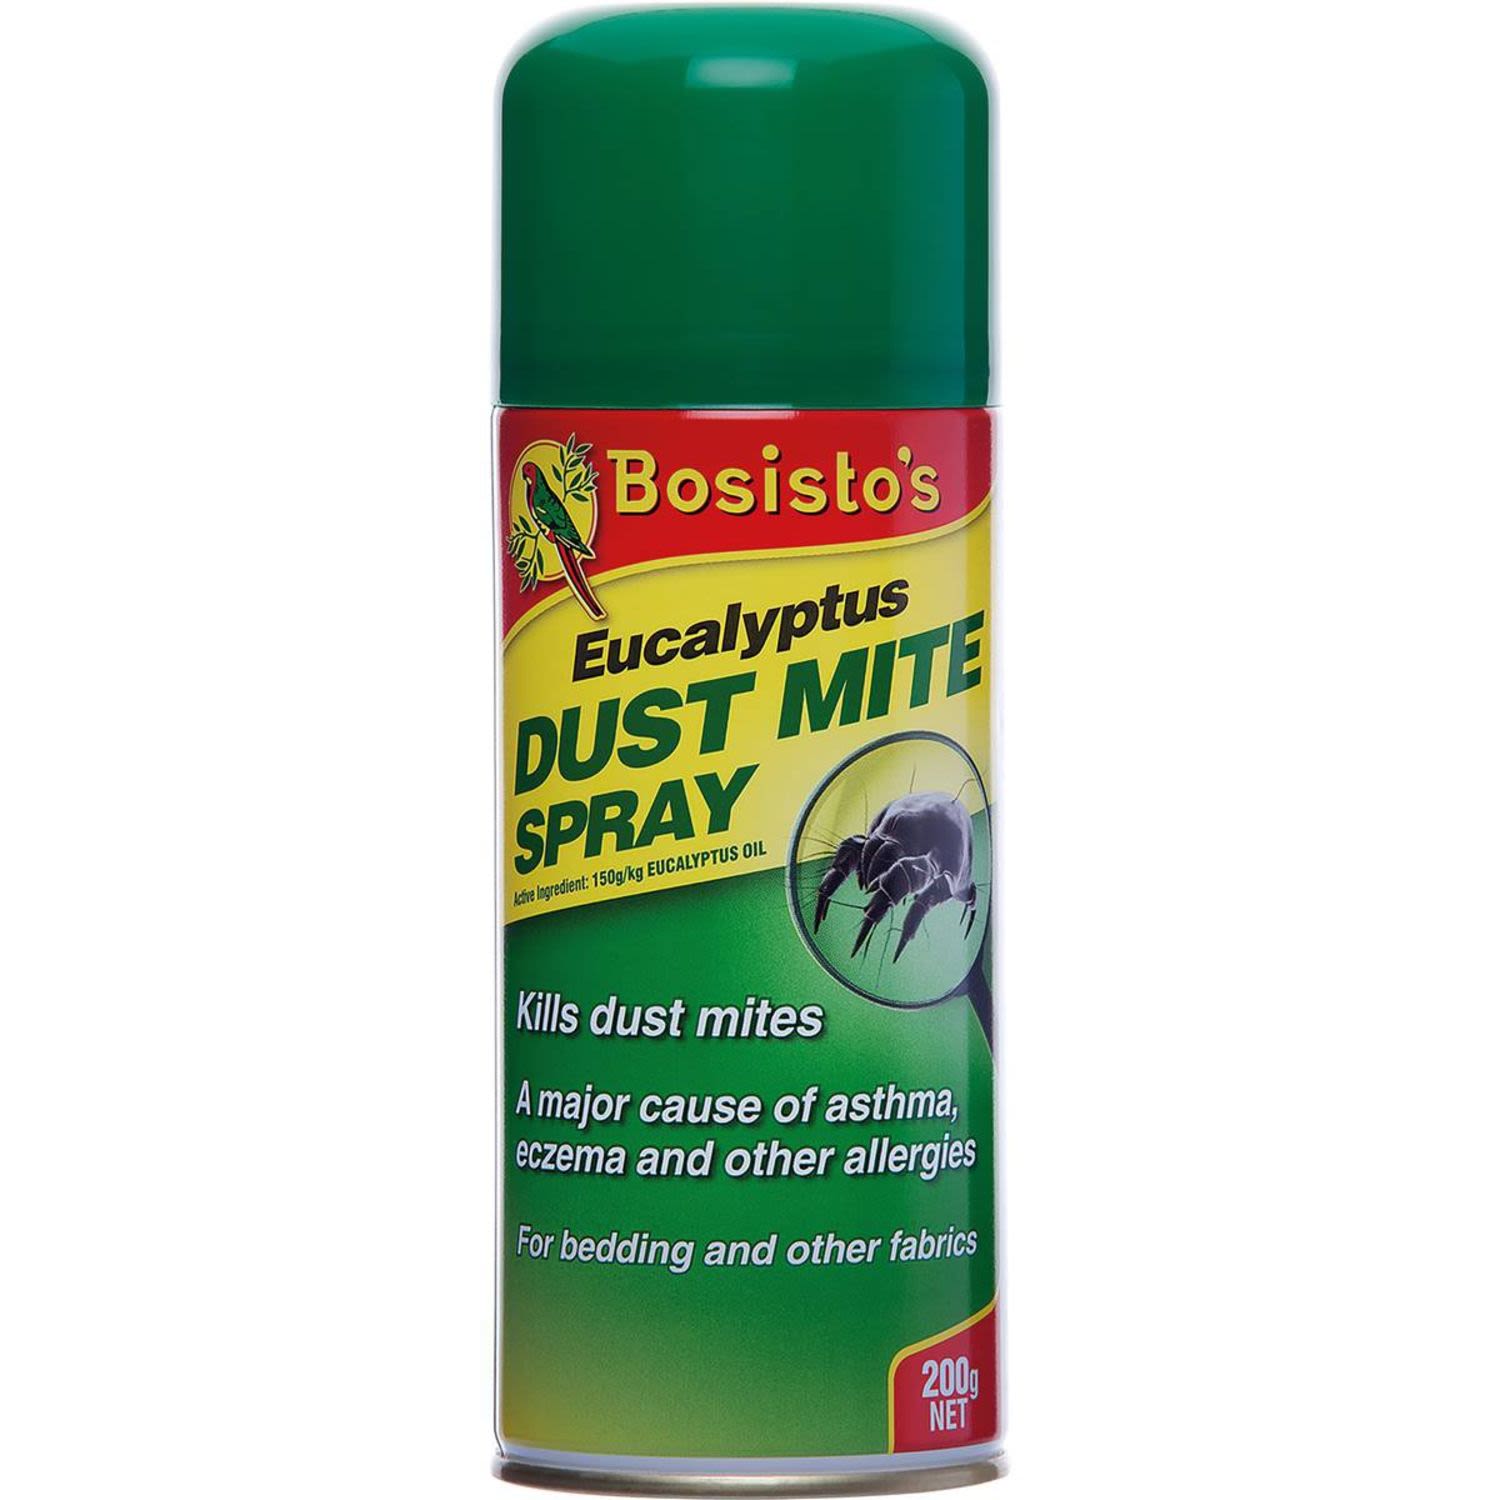 Bosisto's Eucalyptus Dust Mite Spray is specially formulated using nature’s most powerful dust mite killing substance - Eucalyptus Oil. Bosisto’s Eucalyptus Dust Mite Spray is highly effective in killing dust mites with no harsh chemicals and is ideal to be used aspart of Bosisto’s Dust Mite Control Program (including Bosisto’s Dust Mite Wash and Allergen Laundry Liquid) for ongoing allergy control.<br /> <br />